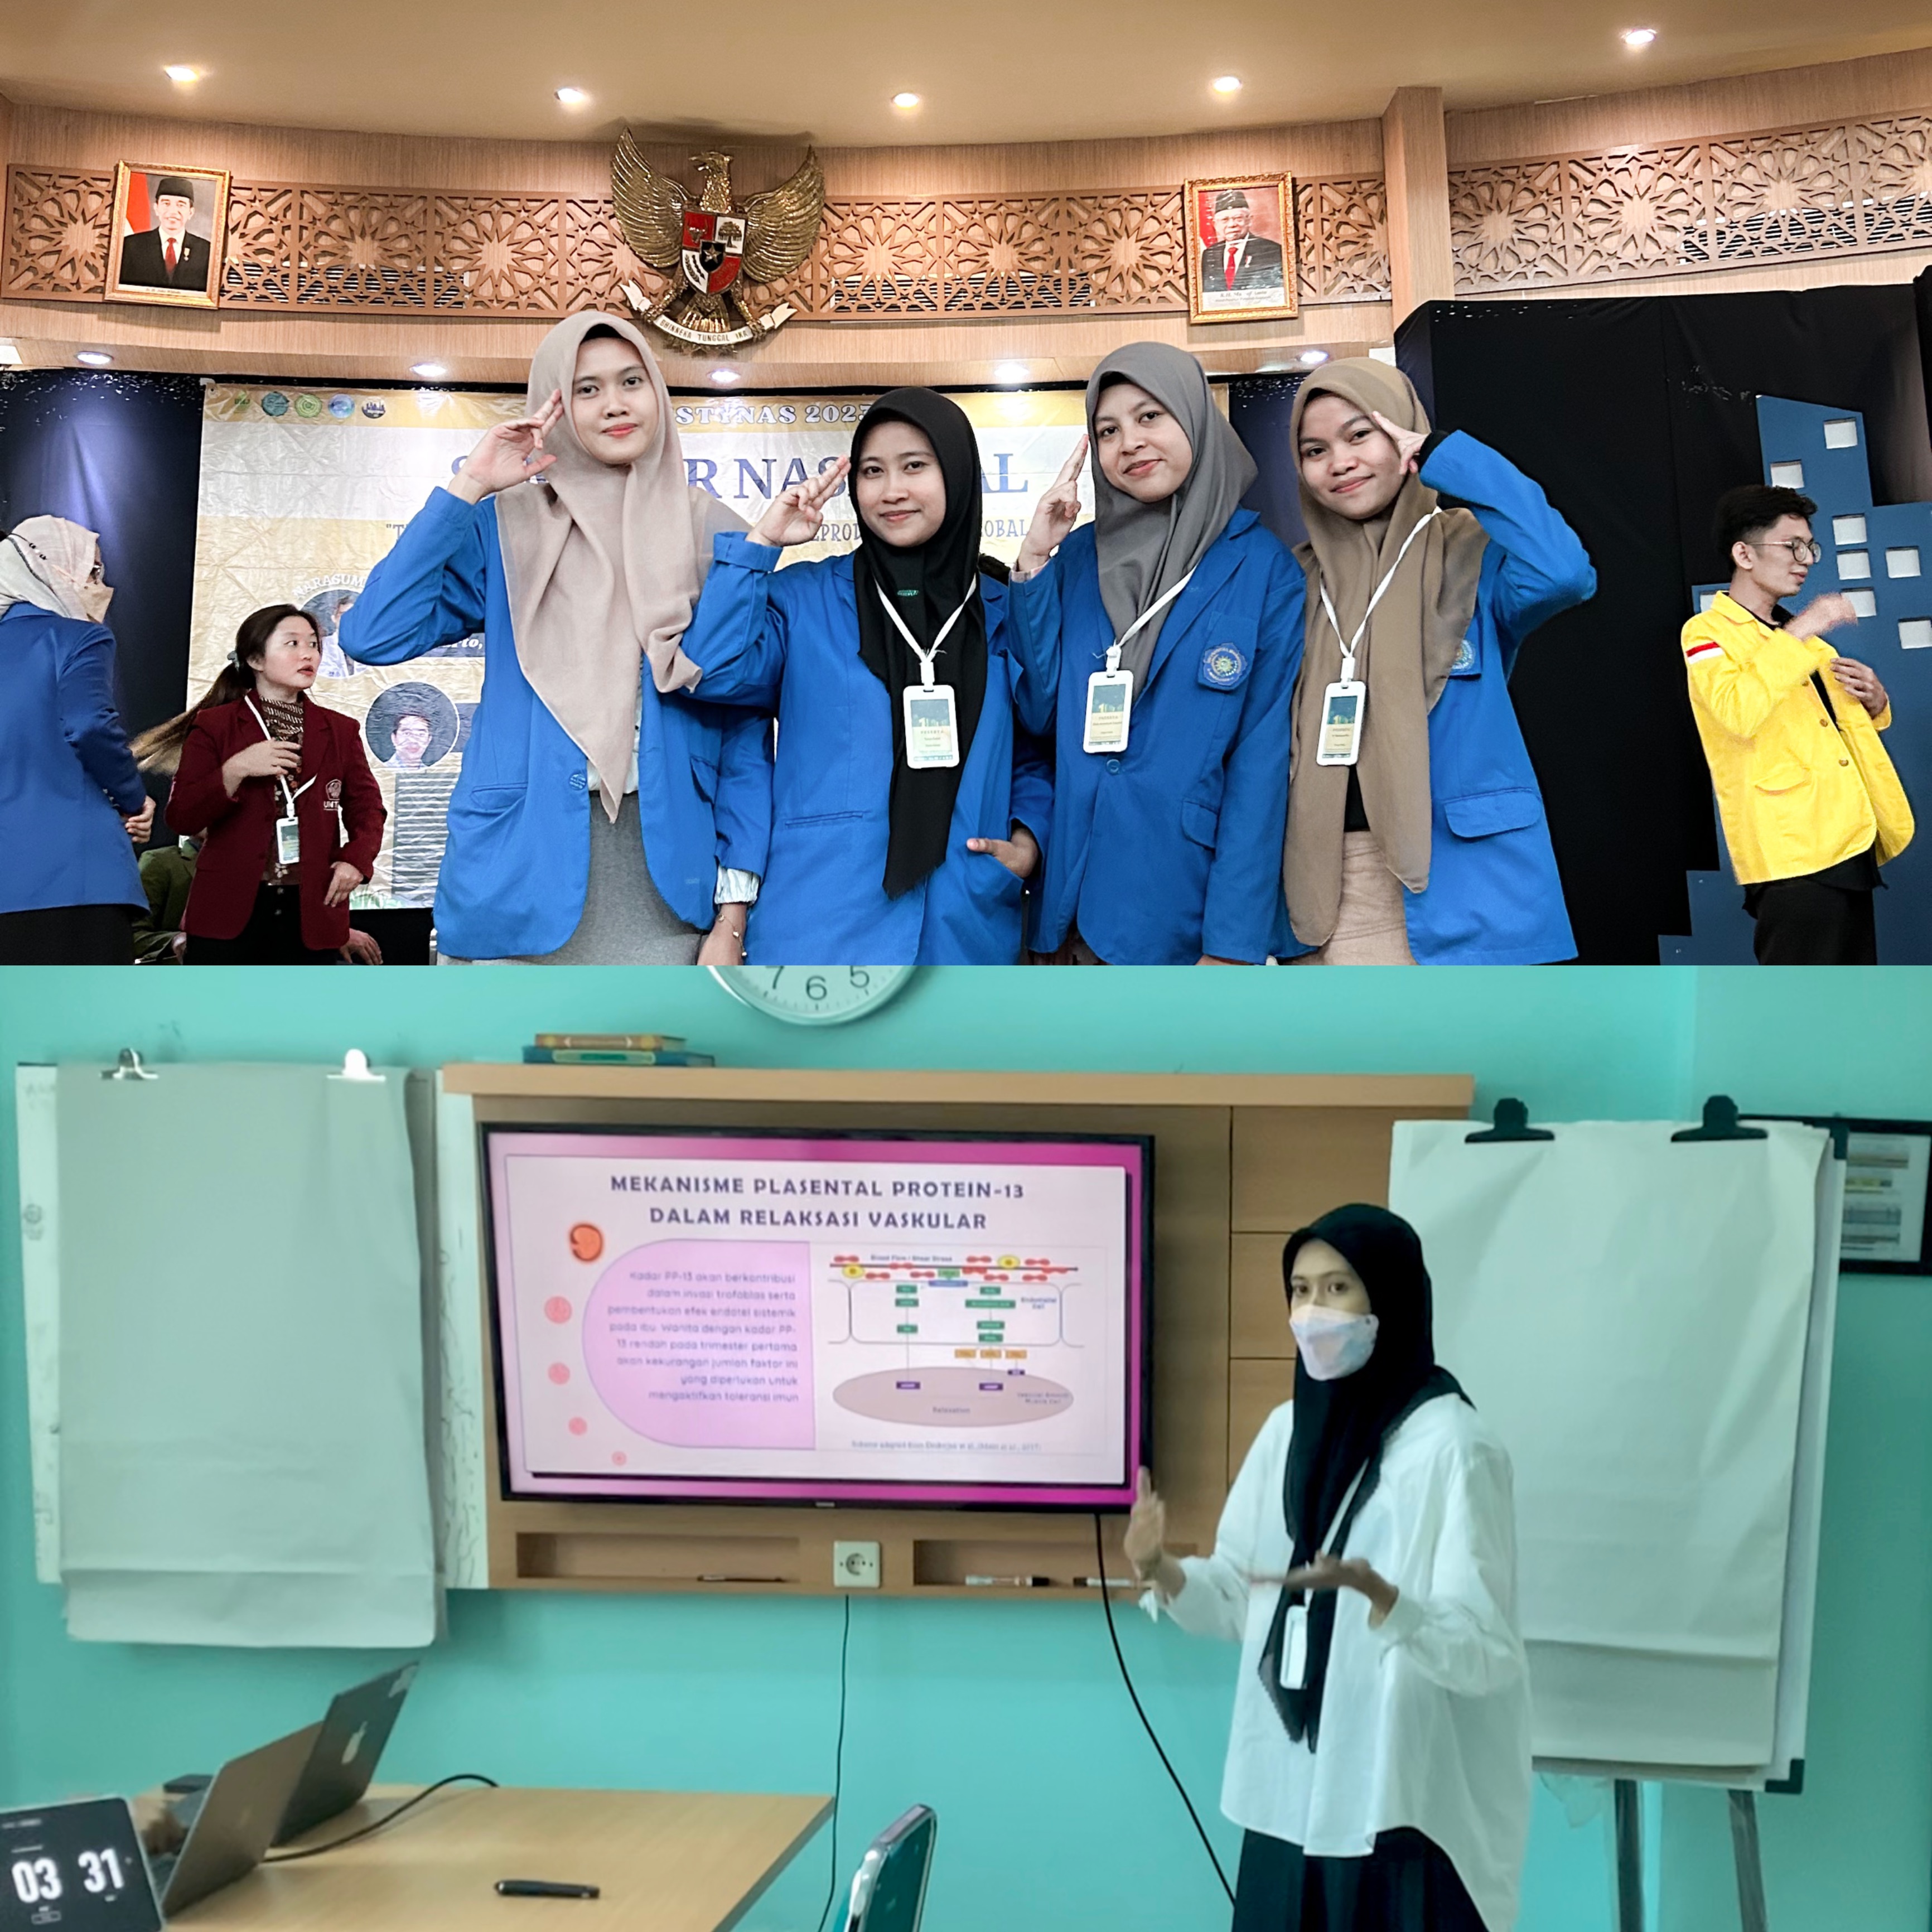 Finalists of Scientific Essay and Public Poster “Muhammadiyah Jakarta Sceintific Competition” Presentation at Muhammadiyah University Jakarta